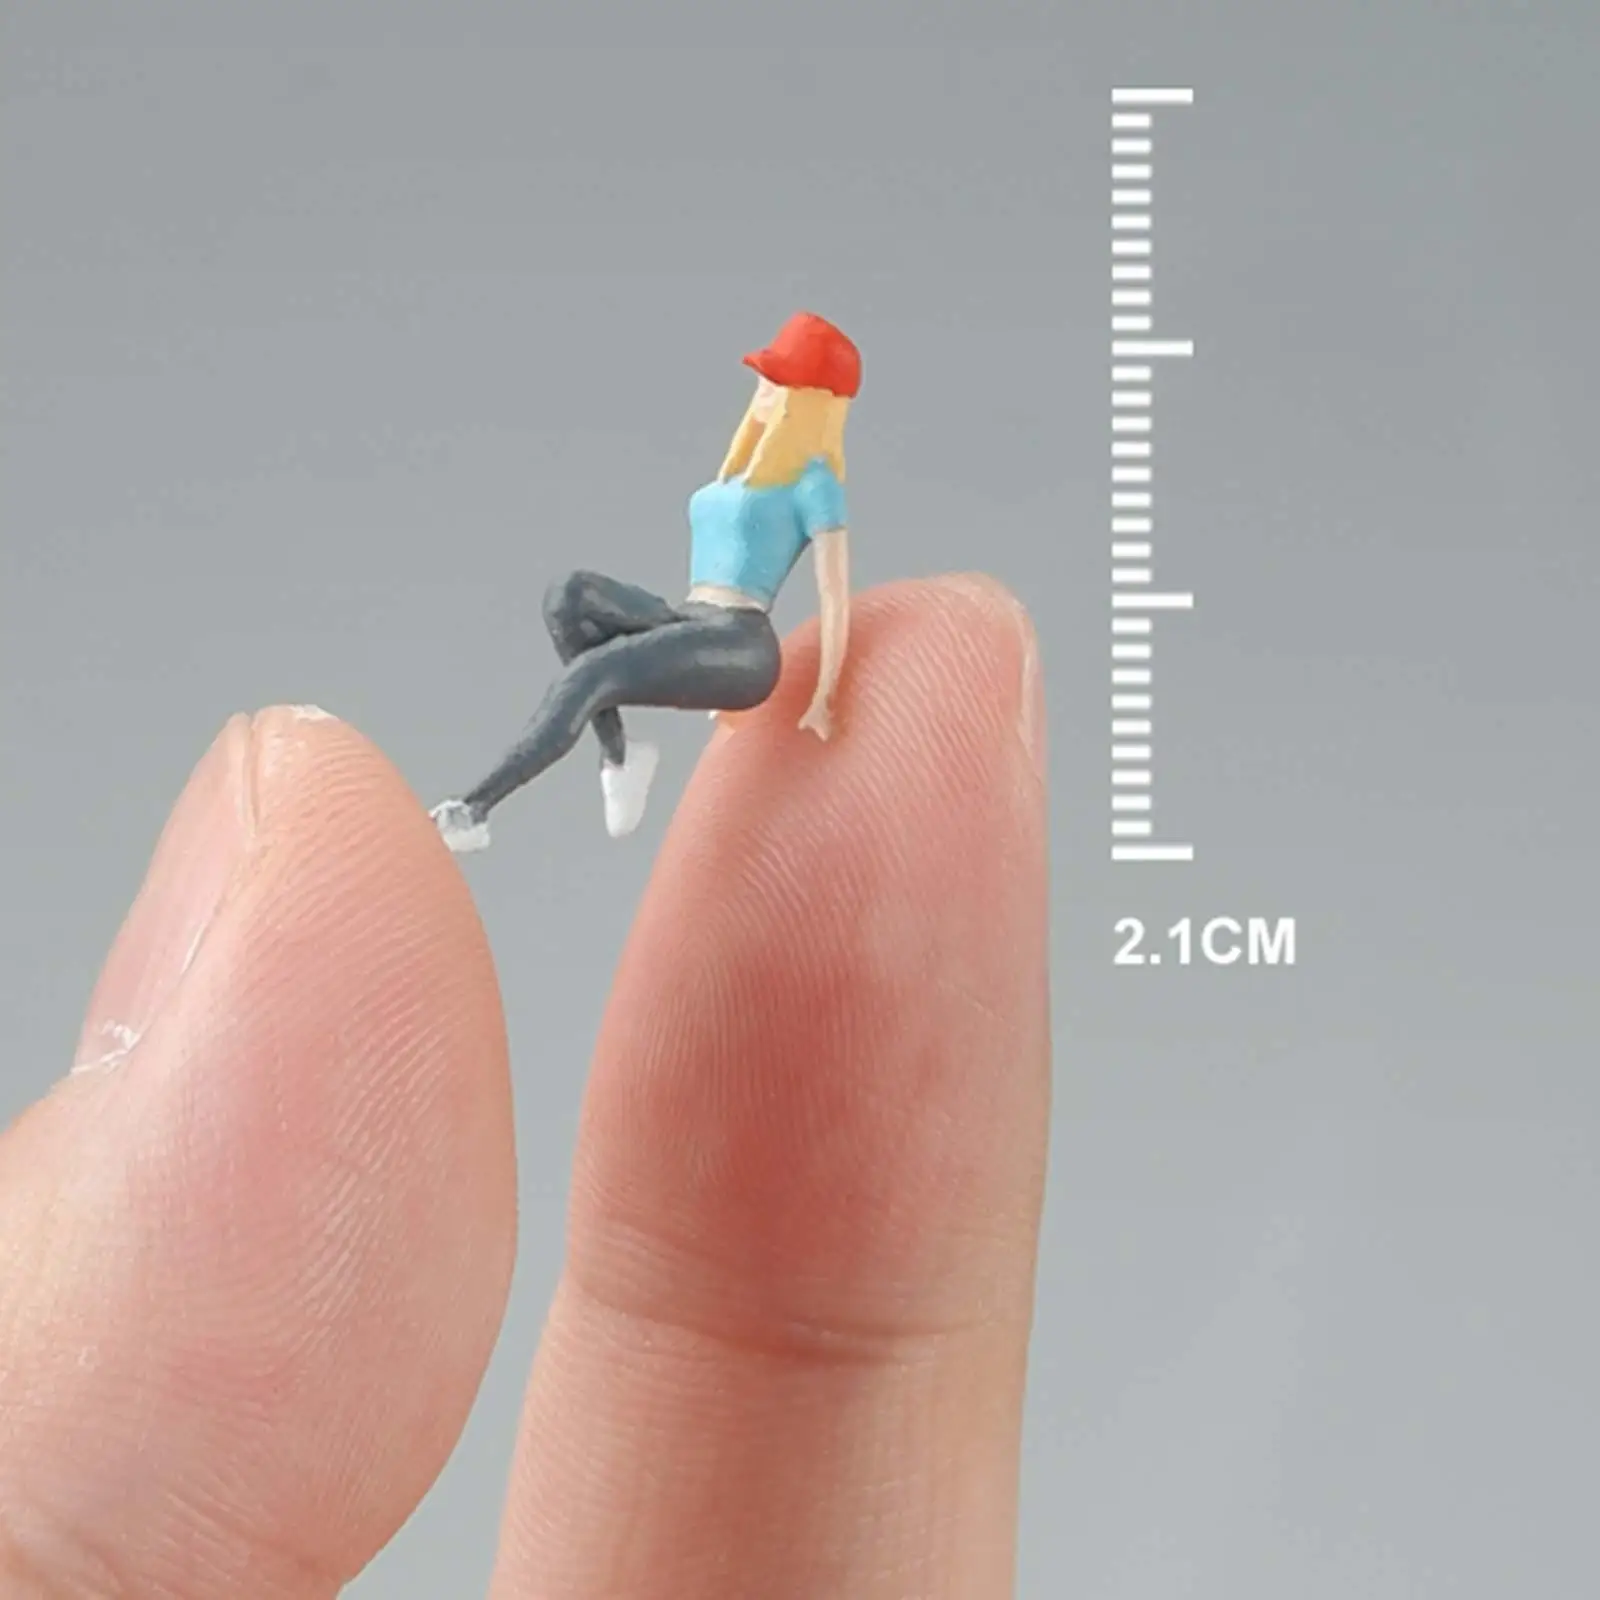 1:64 Girl Figure Hand Painted Character Model People Figurines Simulated Girl Figures for Miniature Scene Architectural Building